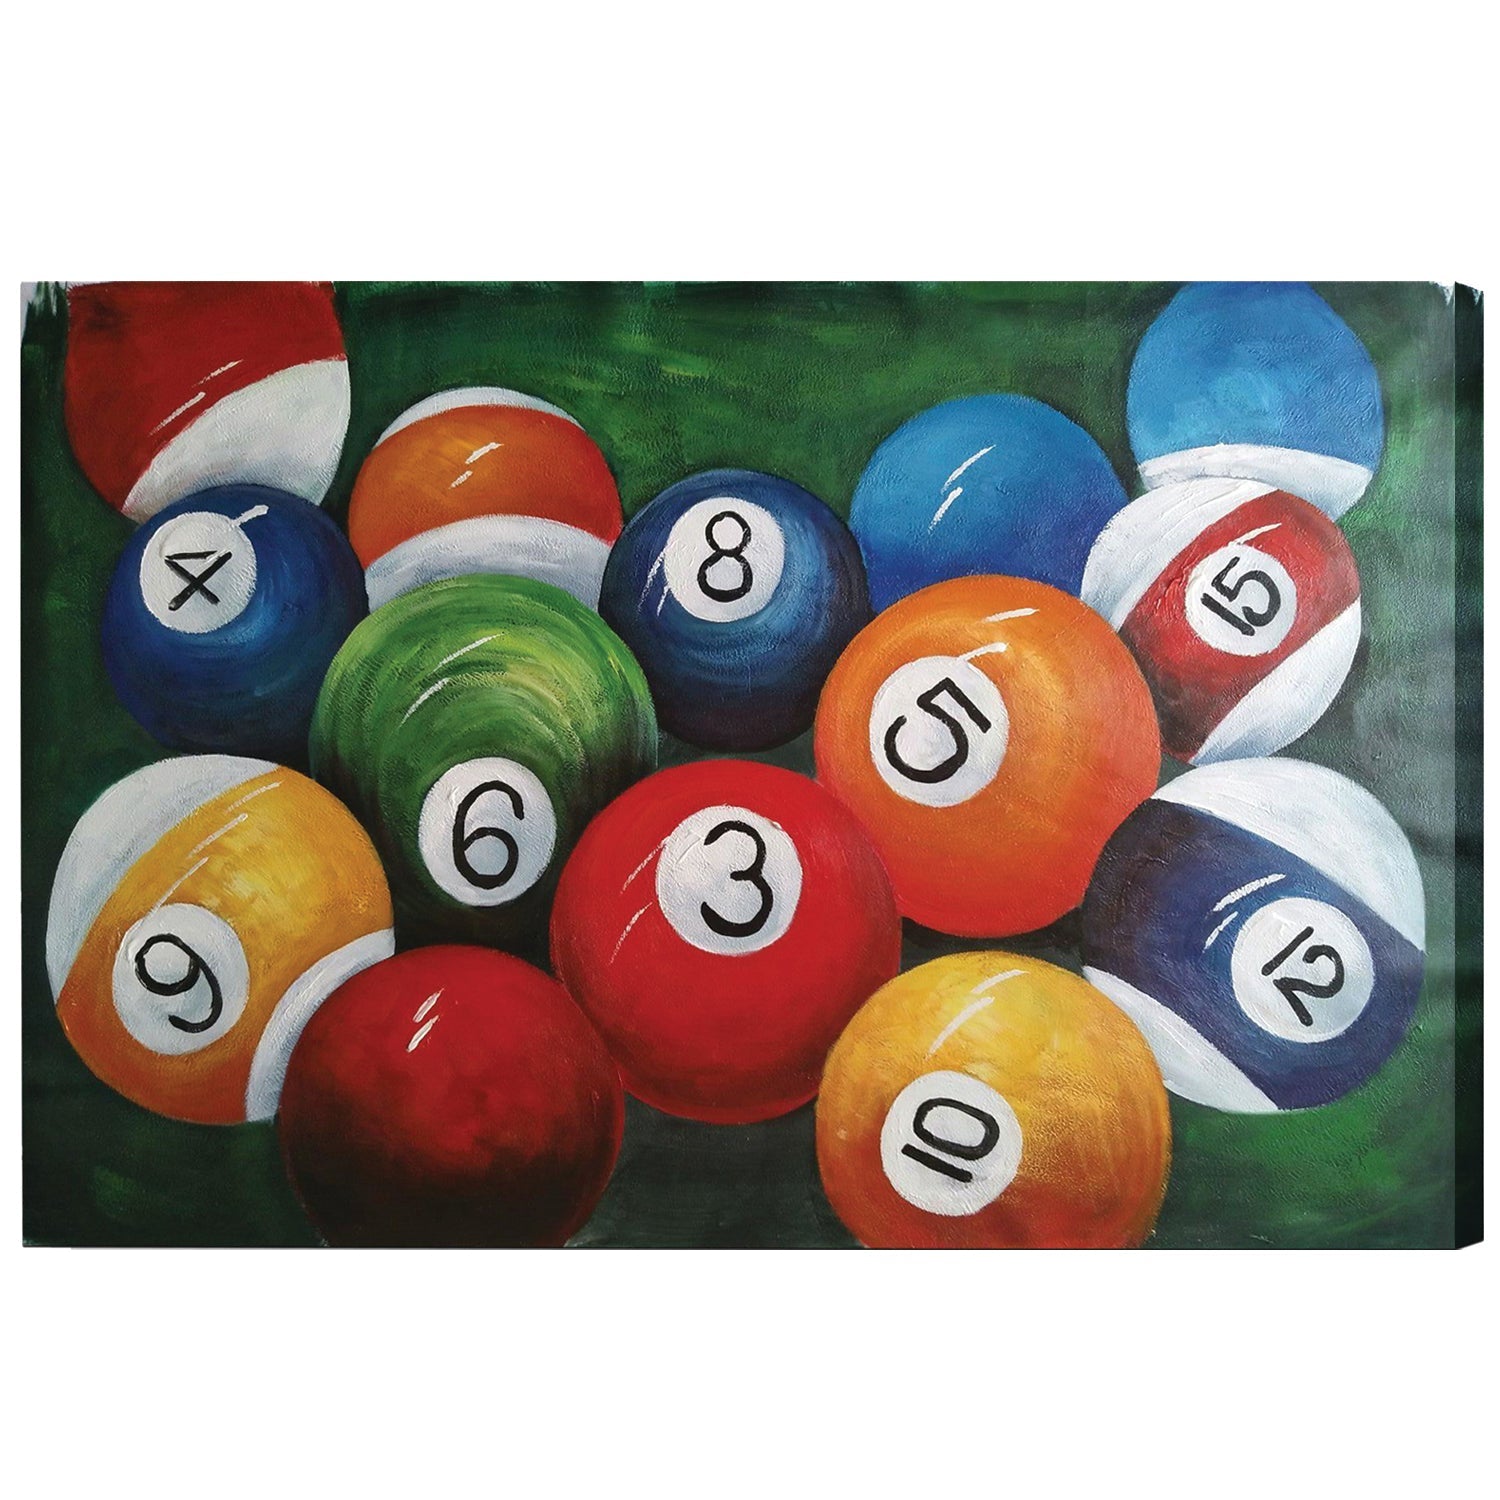 OIL PAINTING ON CANVAS - BILLIARD BALLS CLOSE UP-Game Table Genie